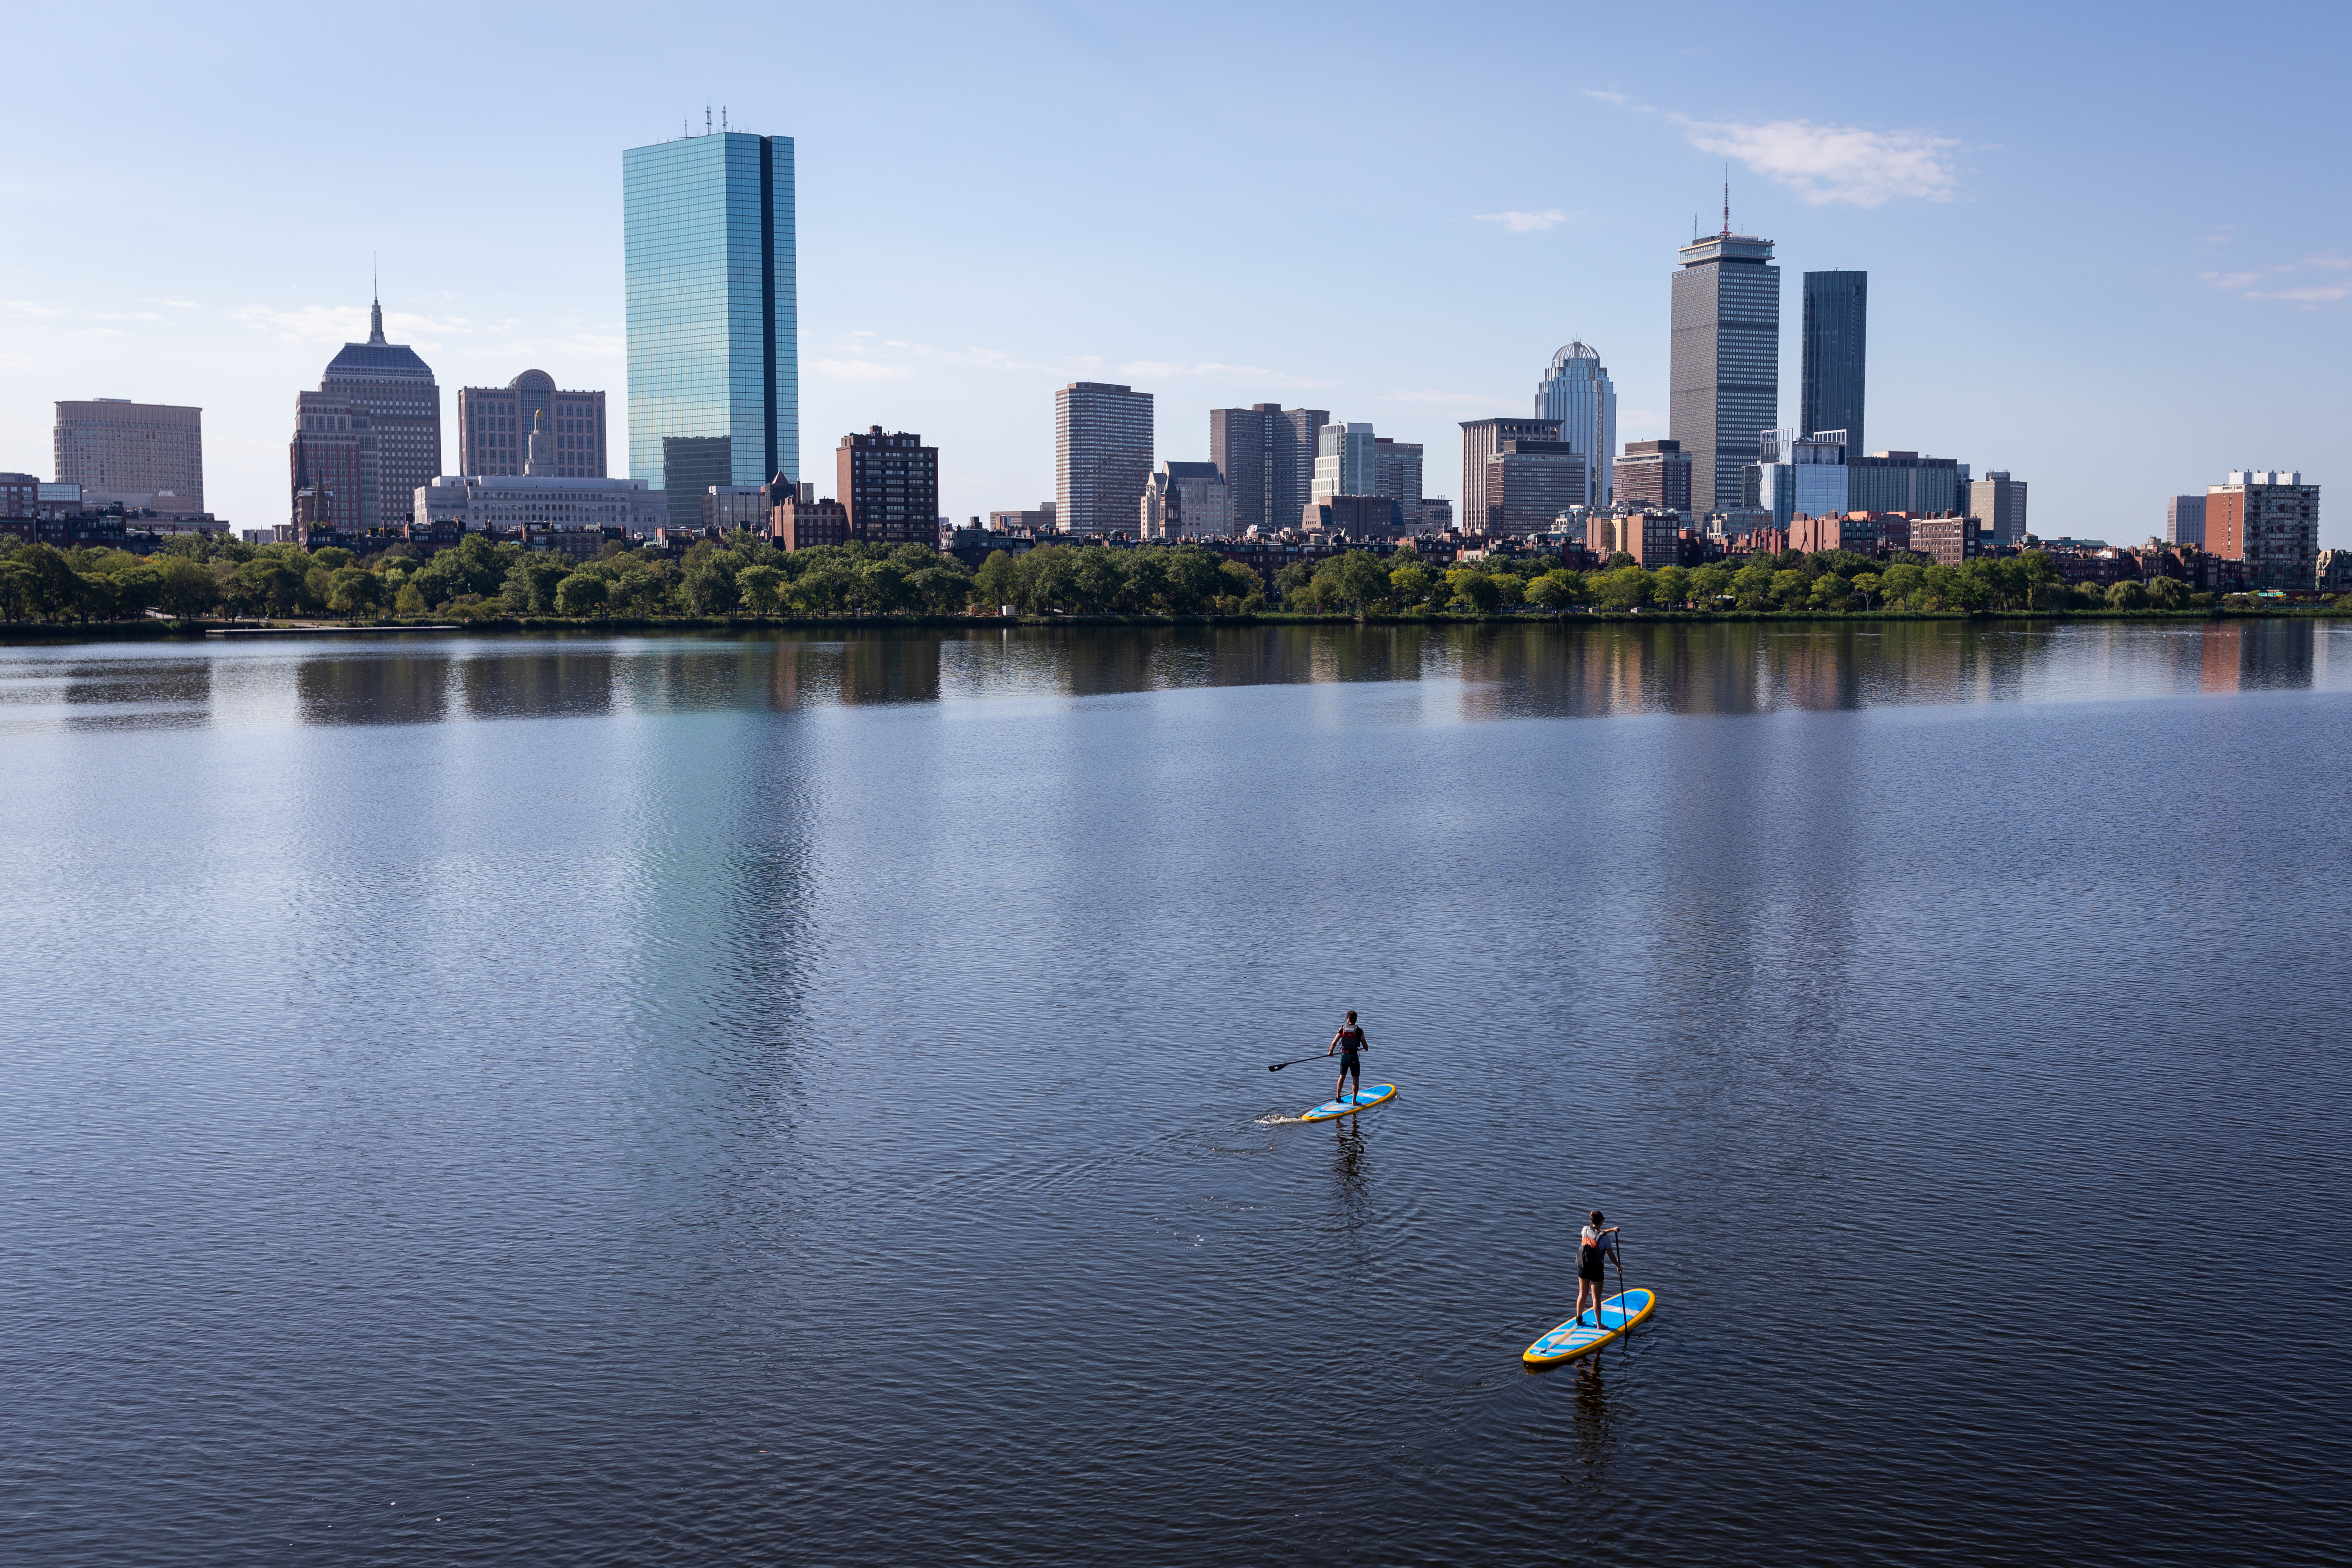 Water quality grades are in for Boston-area rivers: How did the